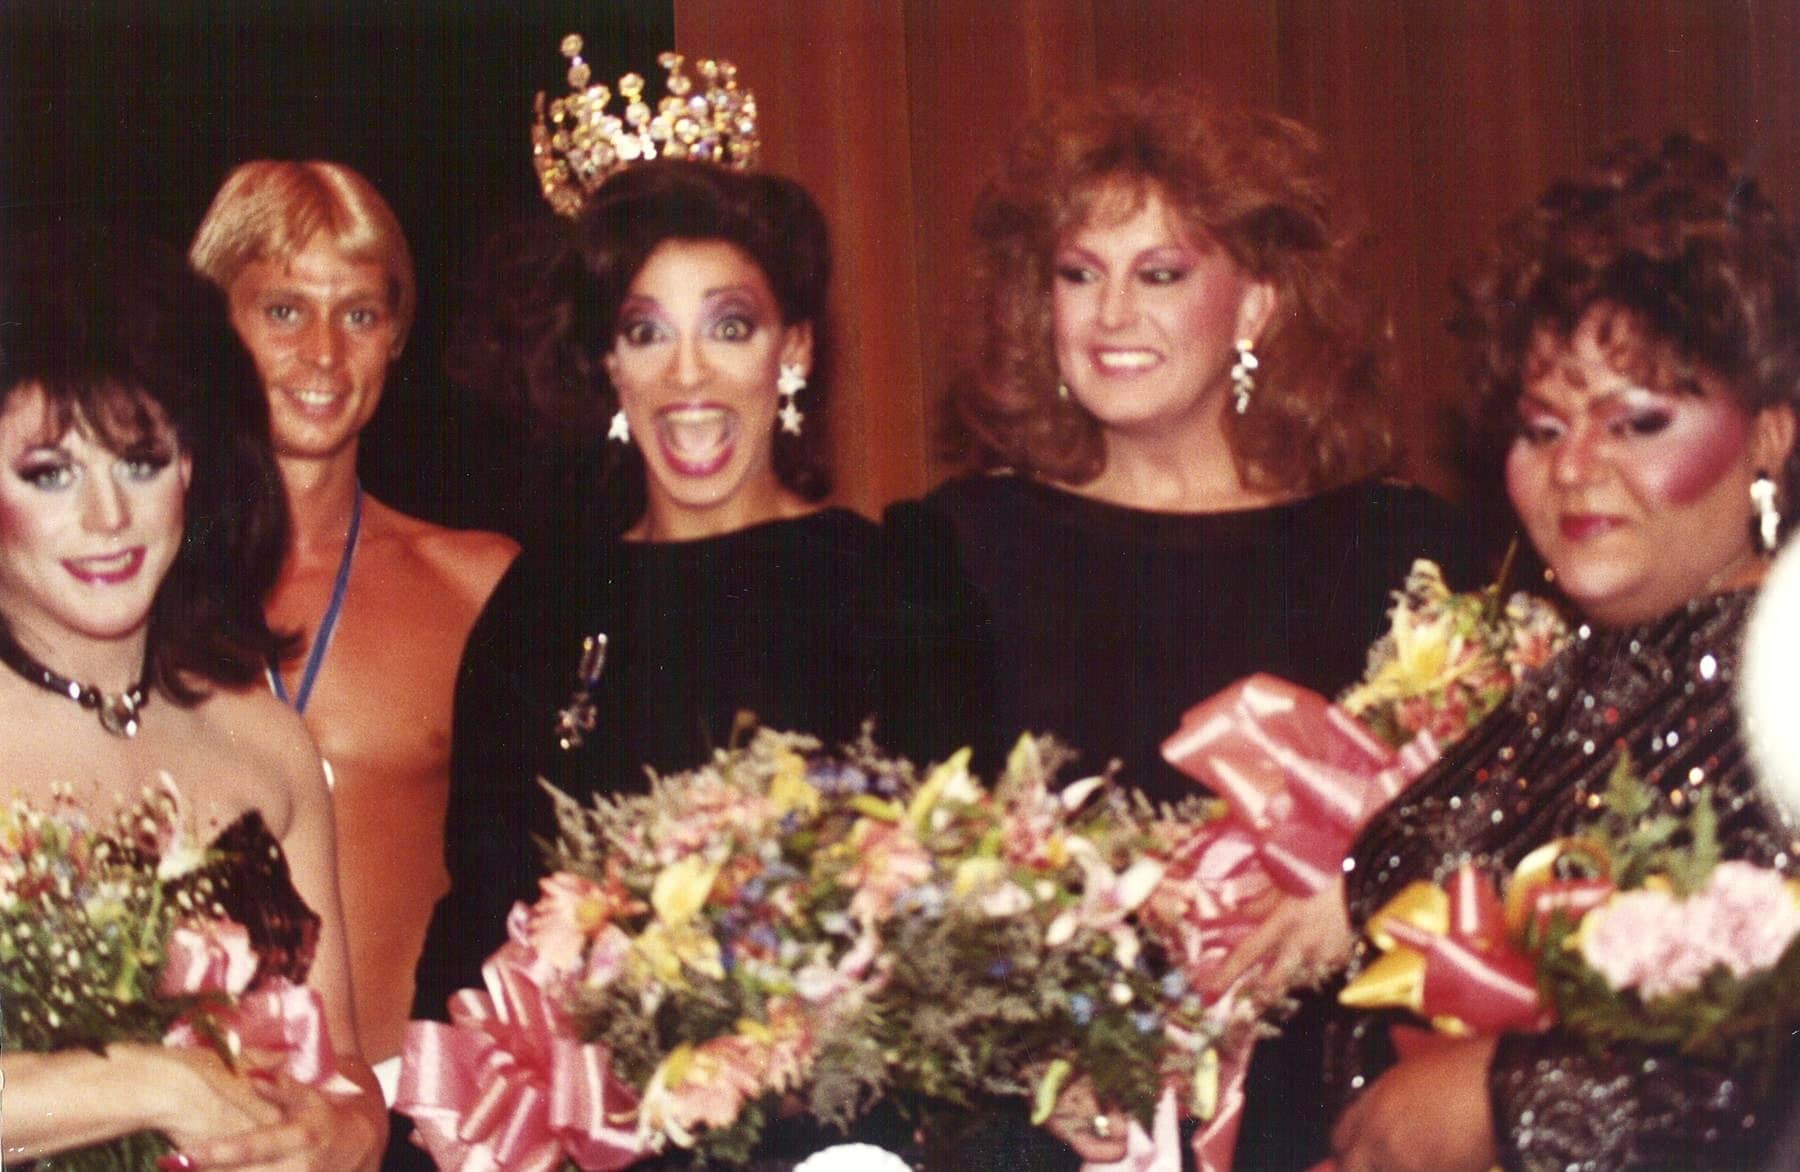 Melinda Ryder, Keith Mitchell, Naomi Sims, Fritz Capone and Donna Day shortly after Naomi's crowning as the new Miss Gay America 1985.